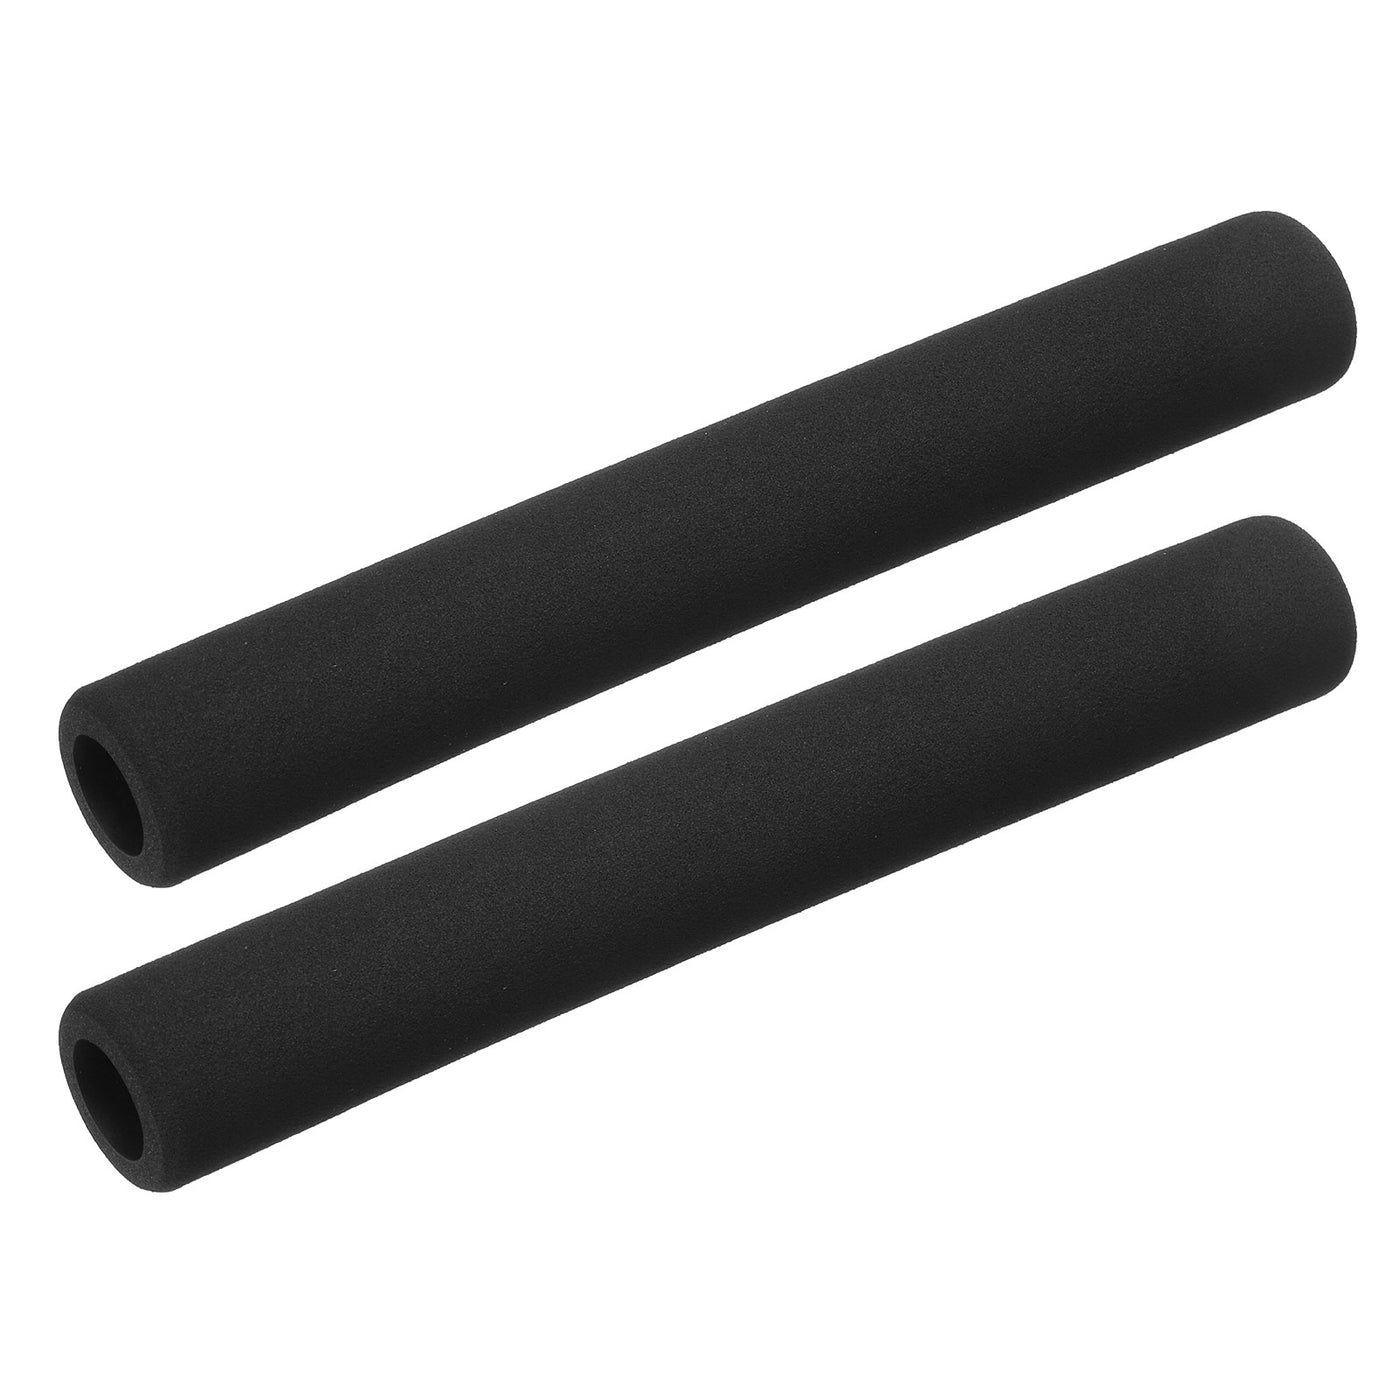 uxcell Uxcell Pipe Insulation Tube Foam Tubing for Handle Grip Support 18mm ID 30mm OD 295mm Heat Preservation Black 2pcs